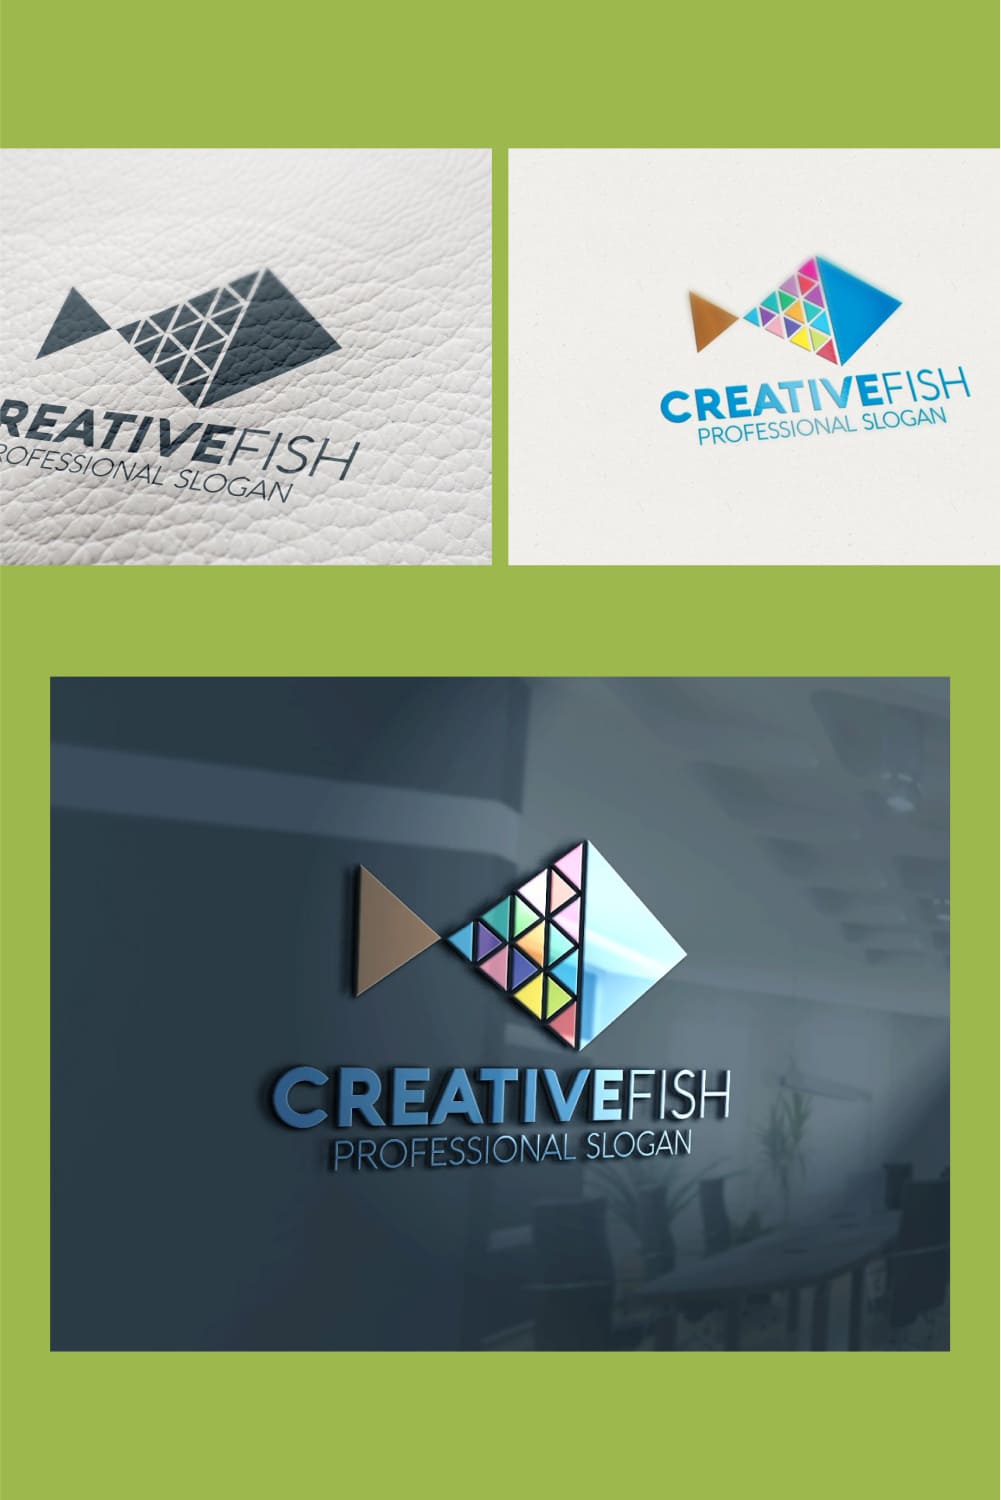 Simple logos with colorful design.